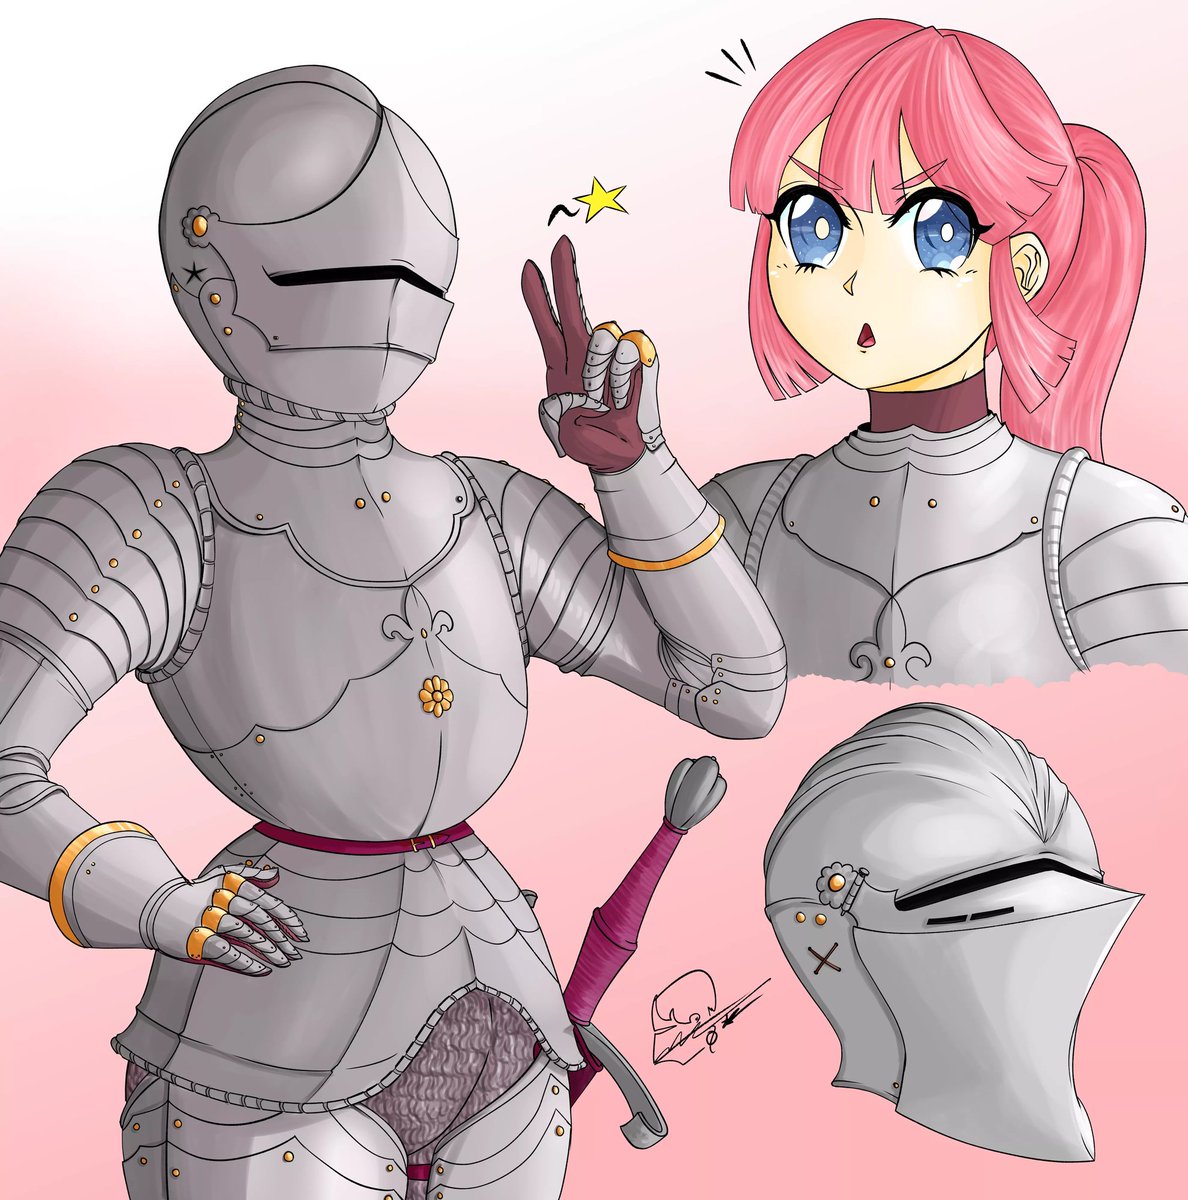 Page 2  Anime Knight Images  Free Download on Freepik